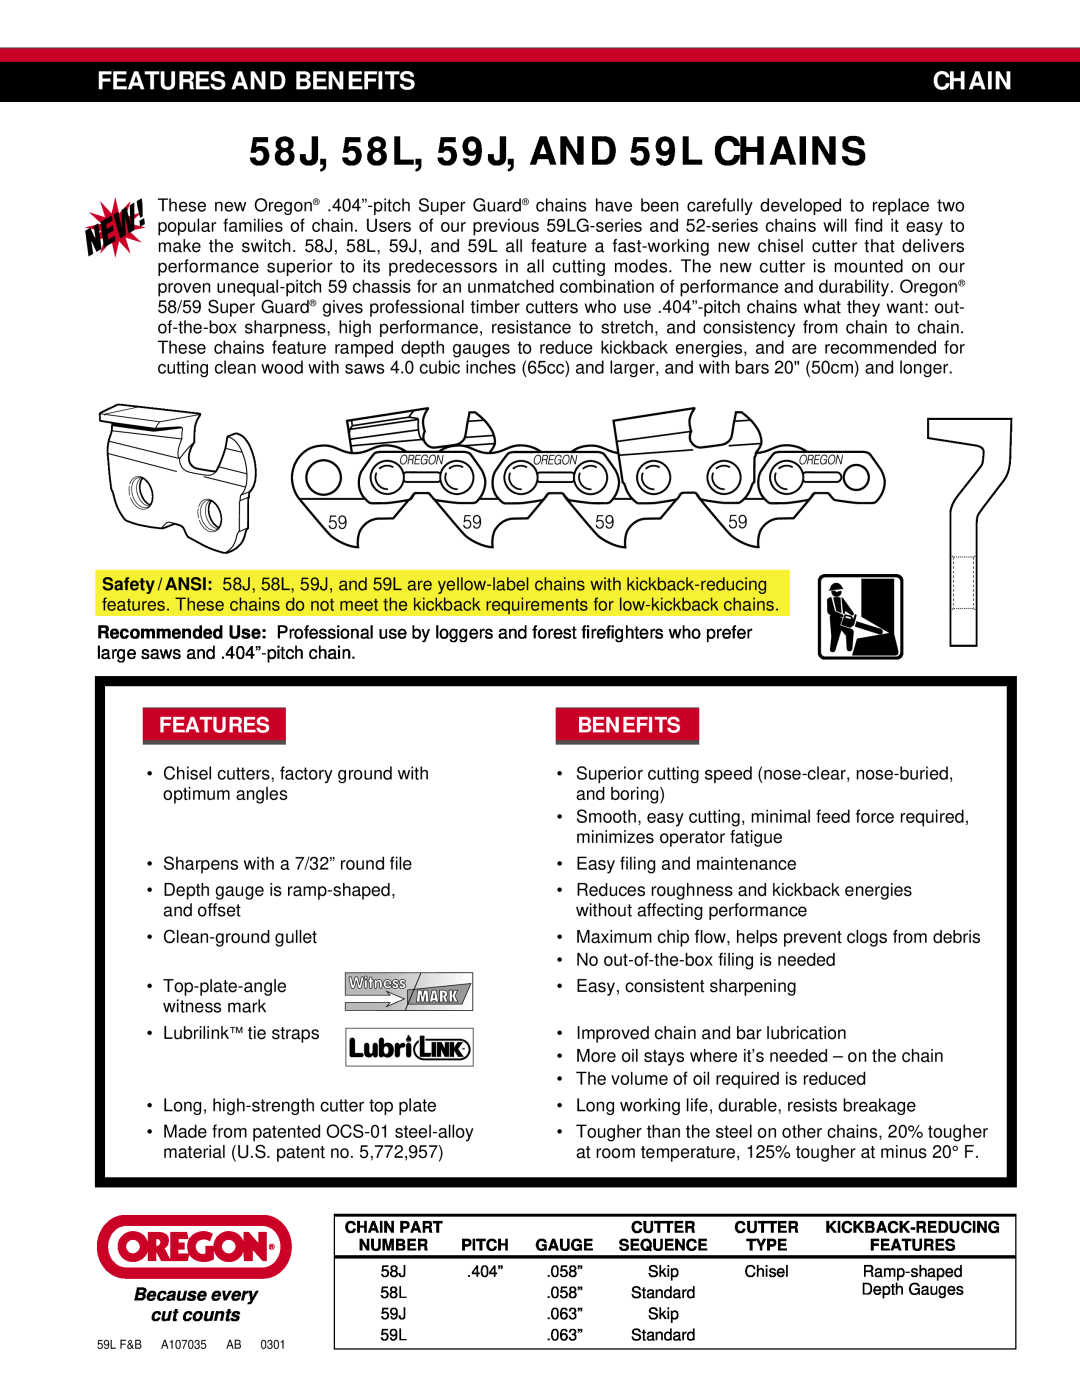 Oregon manual 58J, 58L, 59J, AND 59L CHAINS, Features And Benefits, Chain, Because every, cut counts 